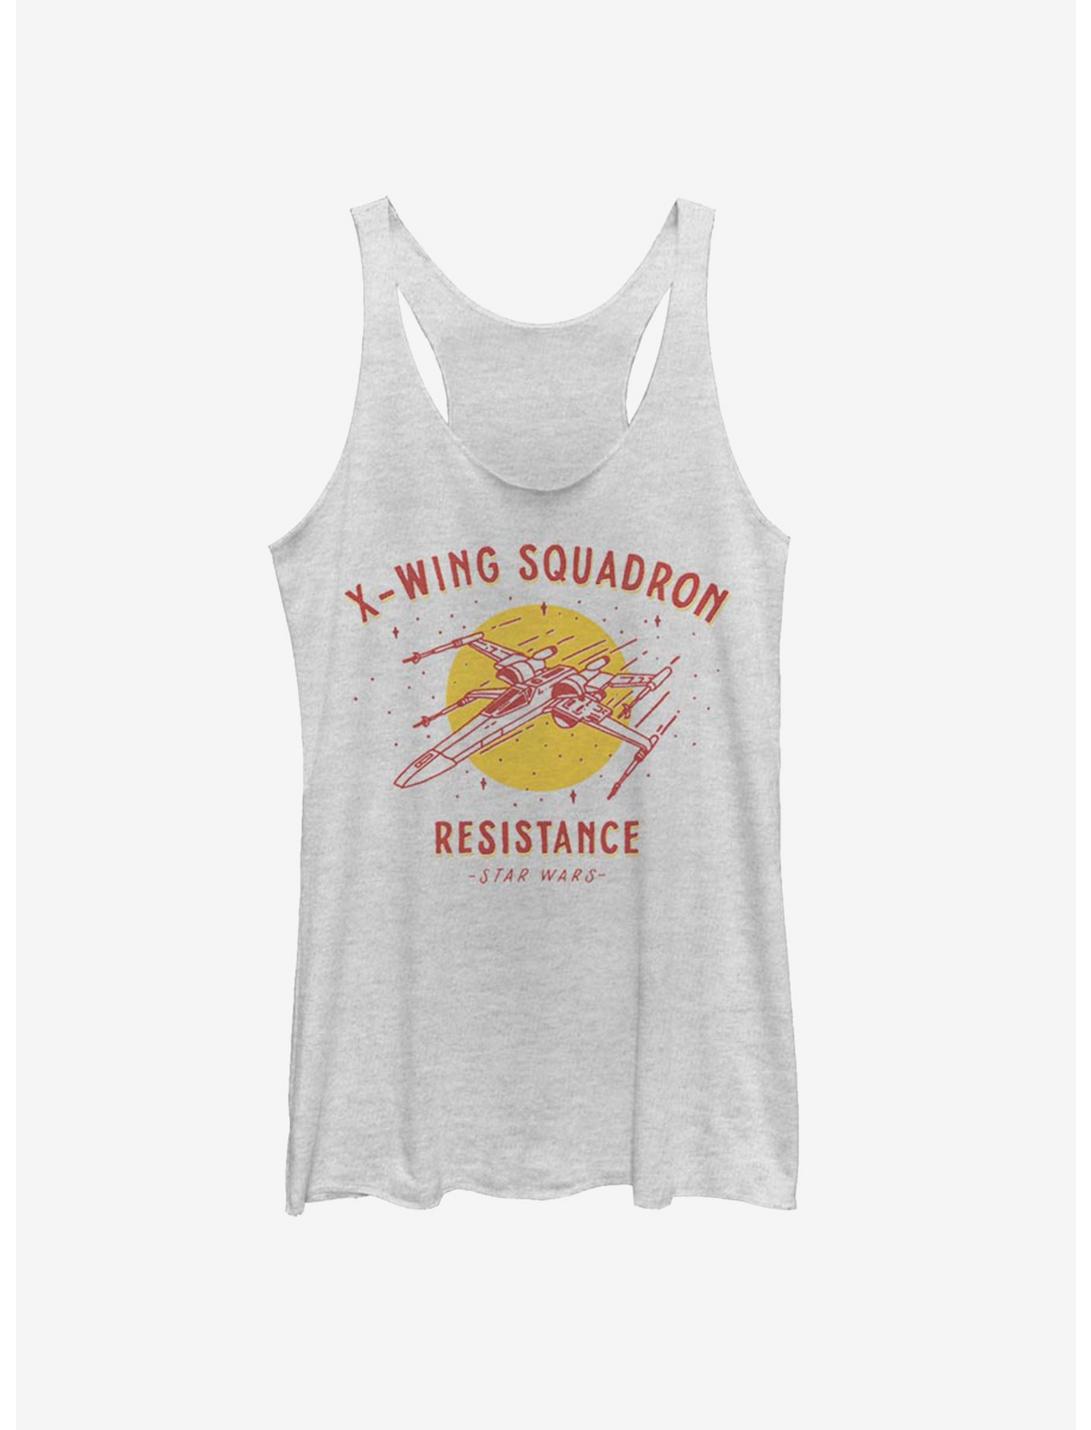 Star Wars Episode IX The Rise Of Skywalker X-Wing Squadron Resistance Womens Tank Top, WHITE HTR, hi-res